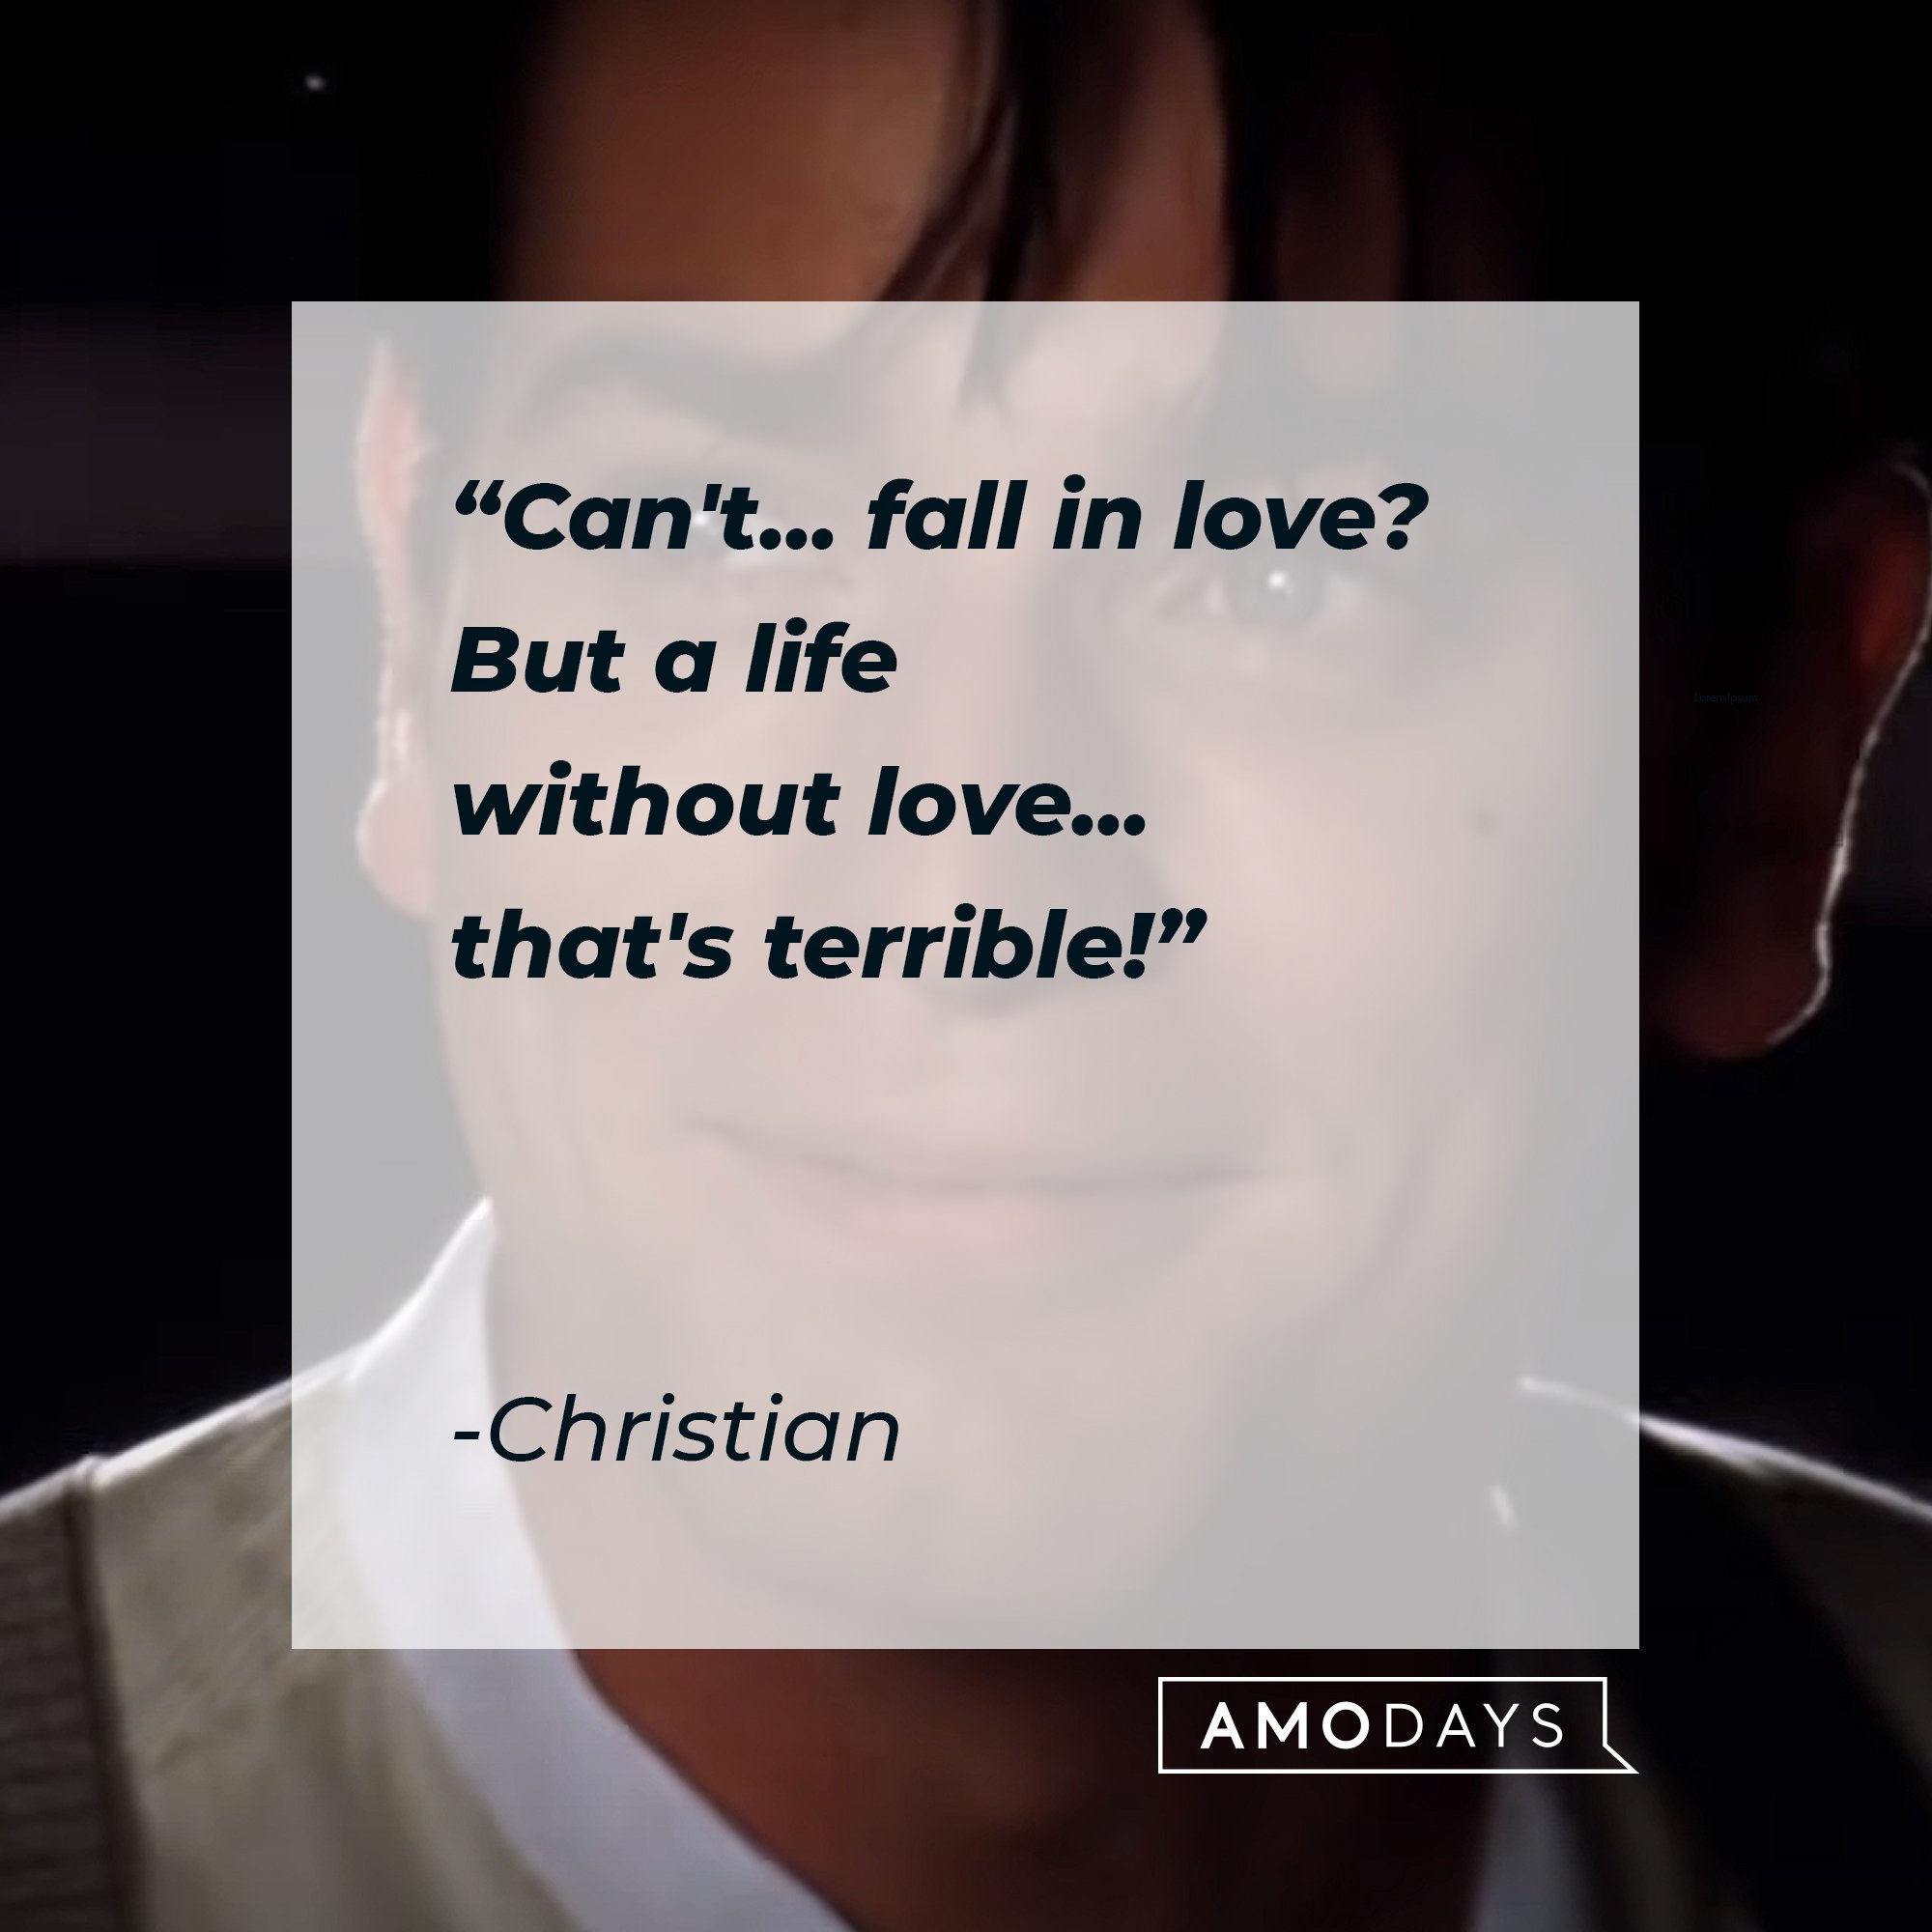   Christian's quote: "Can't... fall in love? But a life without love... that's terrible!" | Image: AmoDays